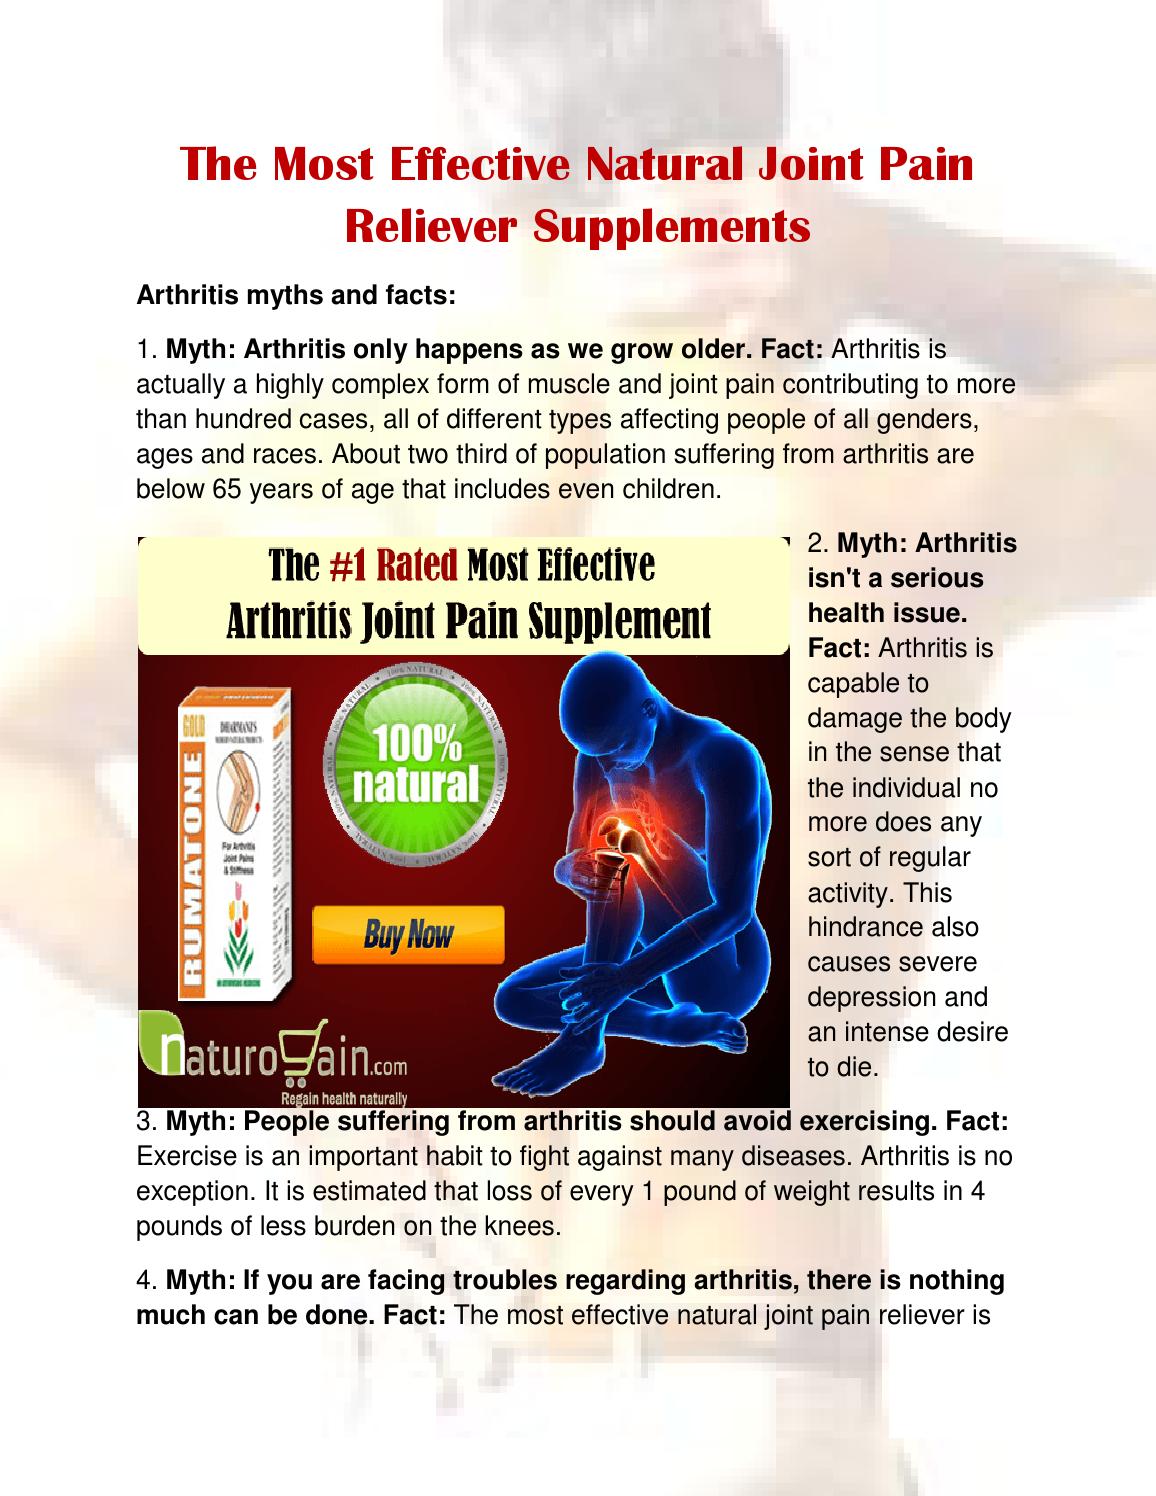 The Most Effective Natural Joint Pain Reliever Supplements by Aaric ...